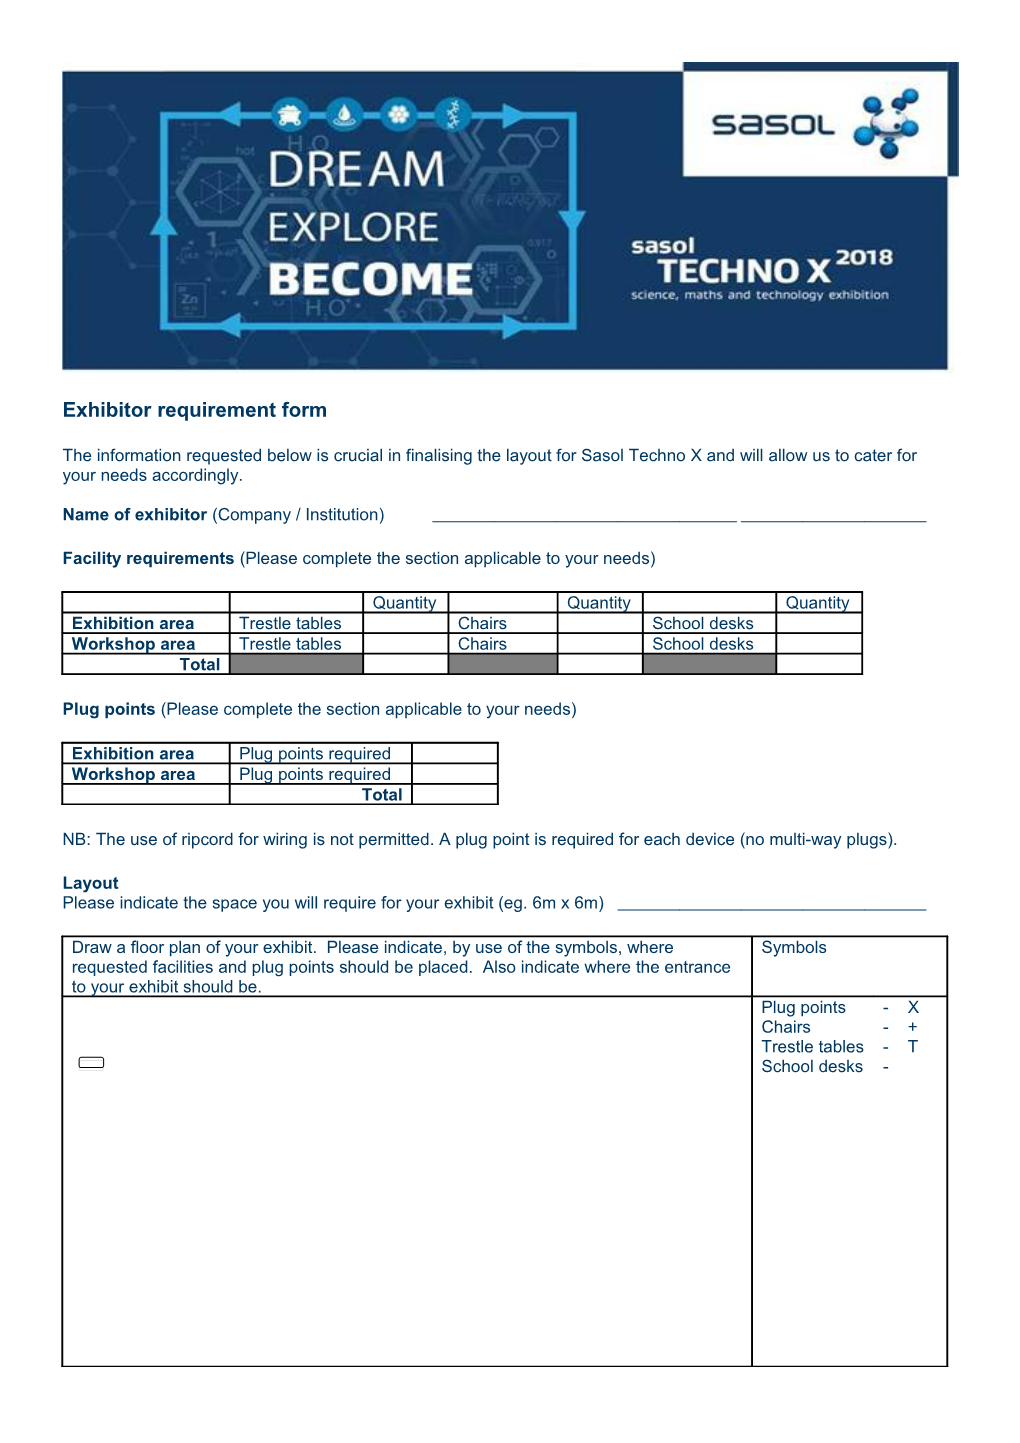 Exhibitor Requirement Form